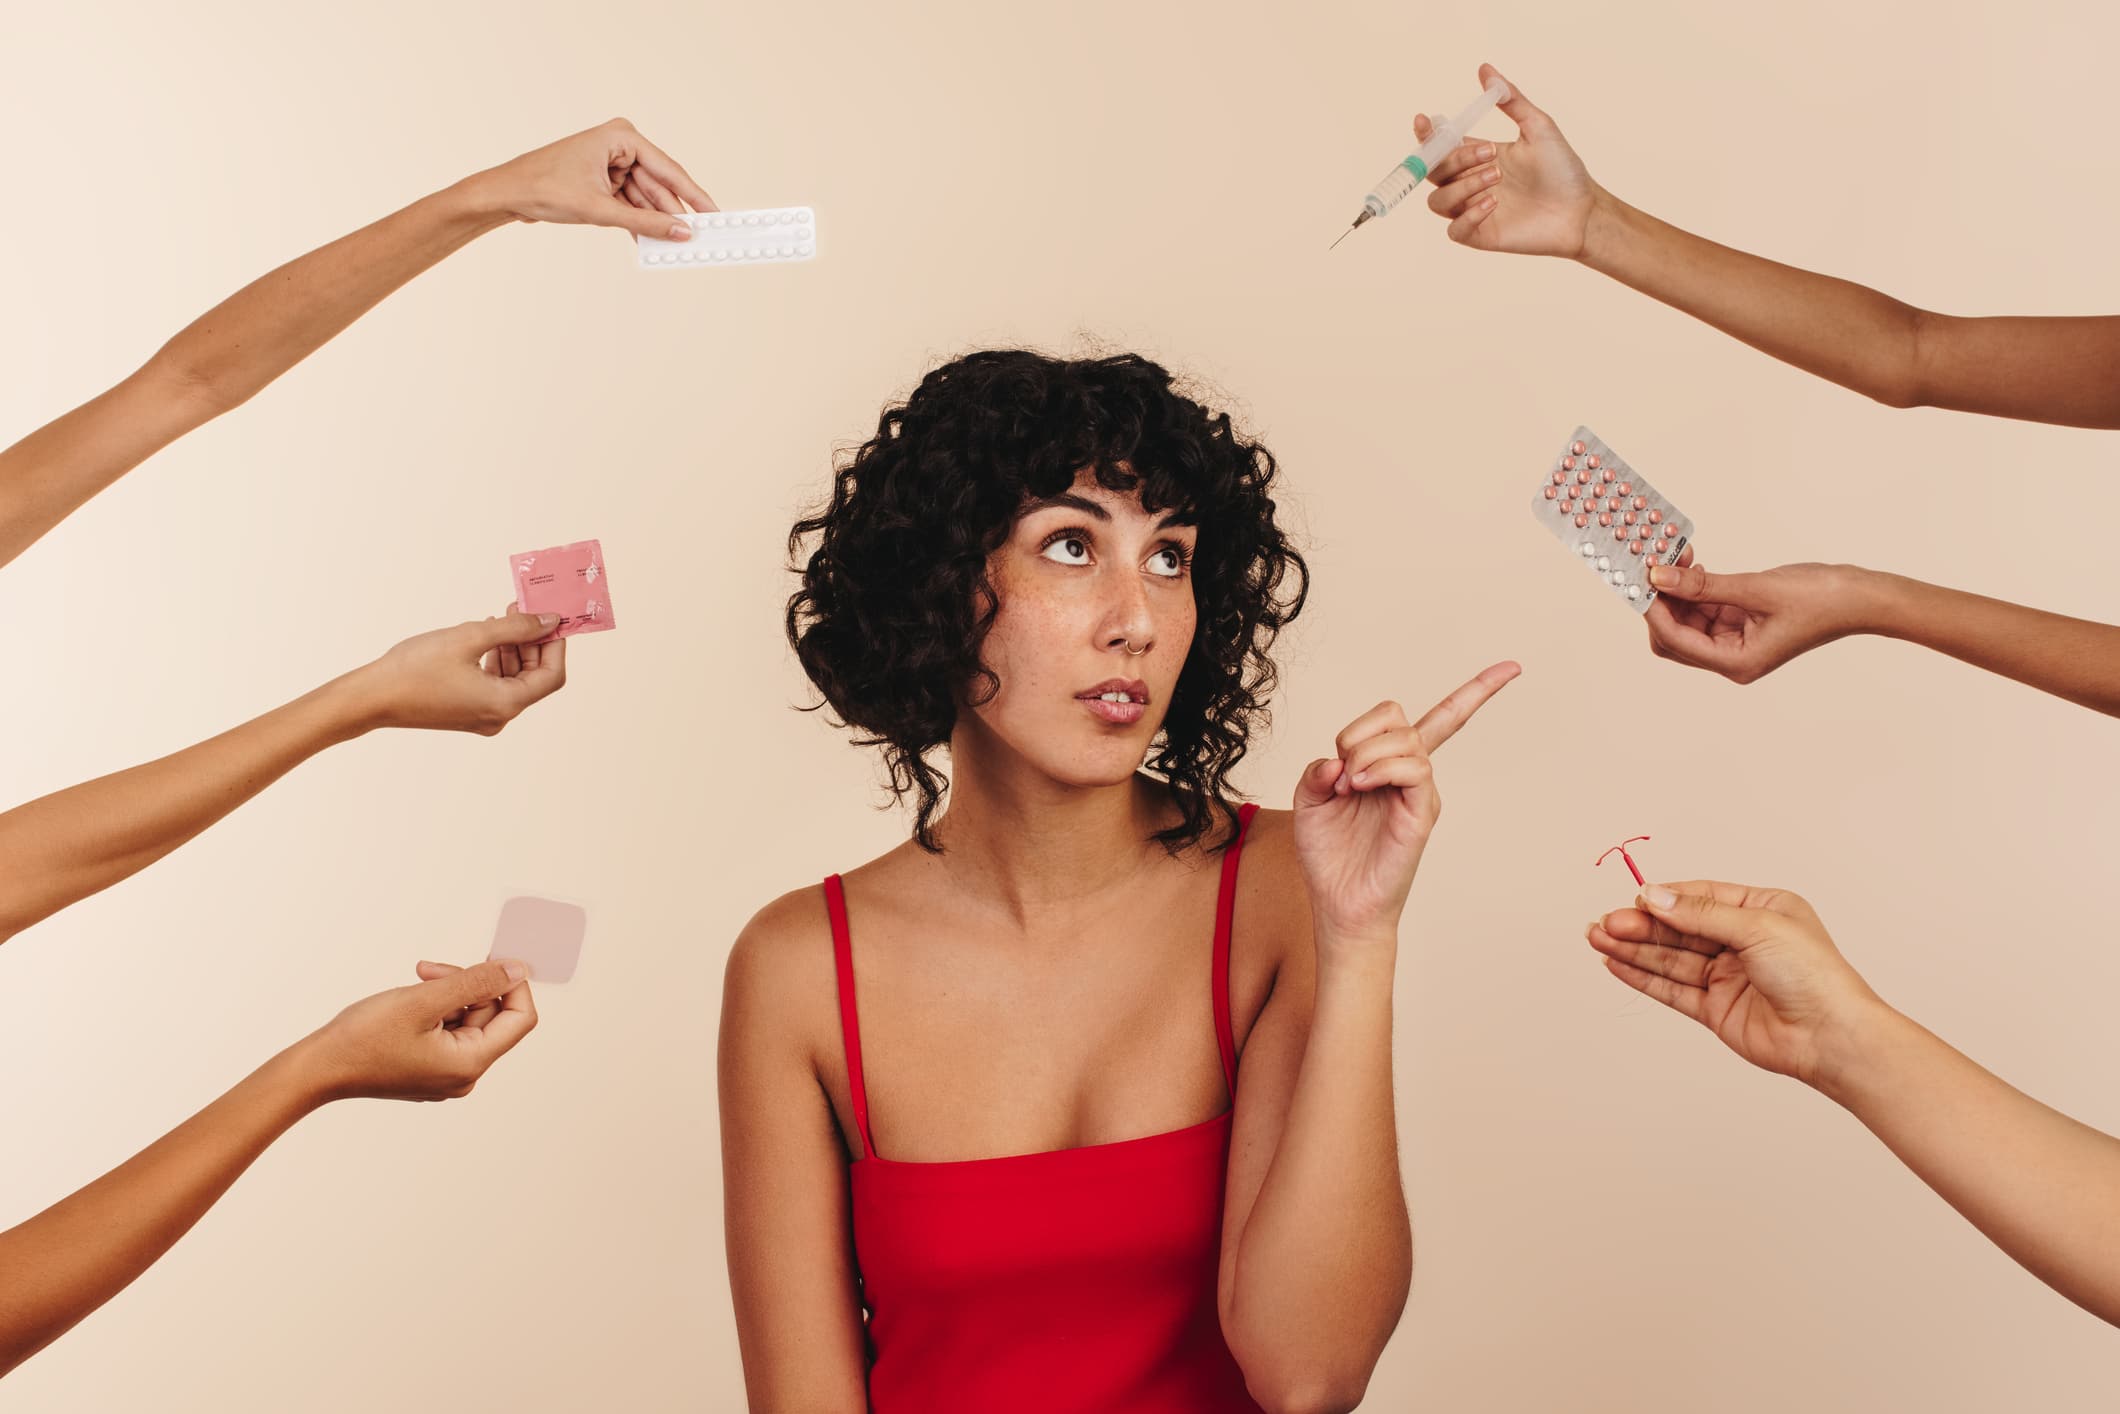 Young woman surrounded by hands holding different birth control methods and pointing at her choice